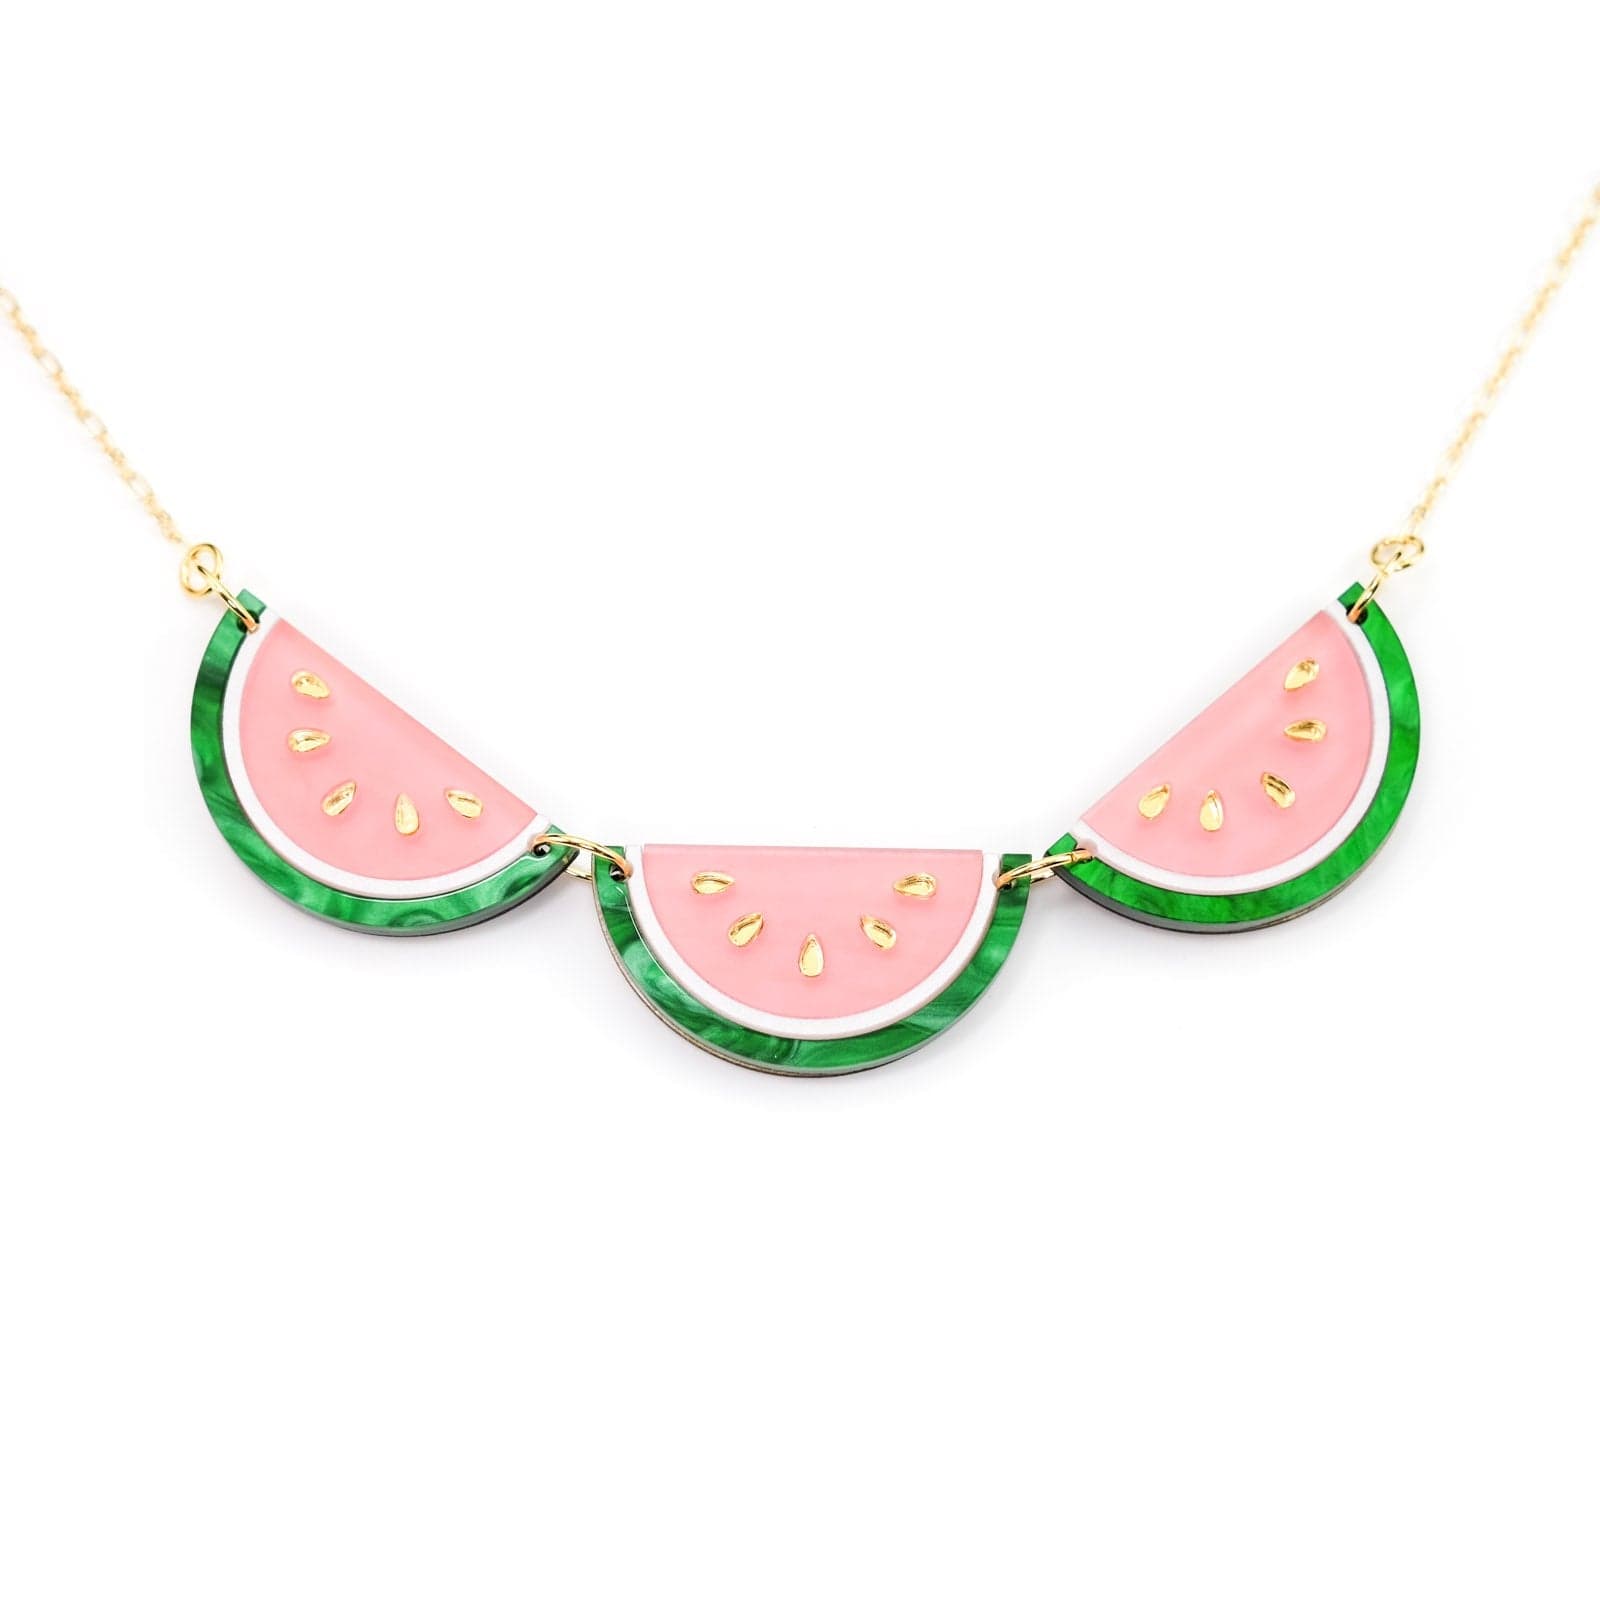 Watermelon slice necklace hand-made 